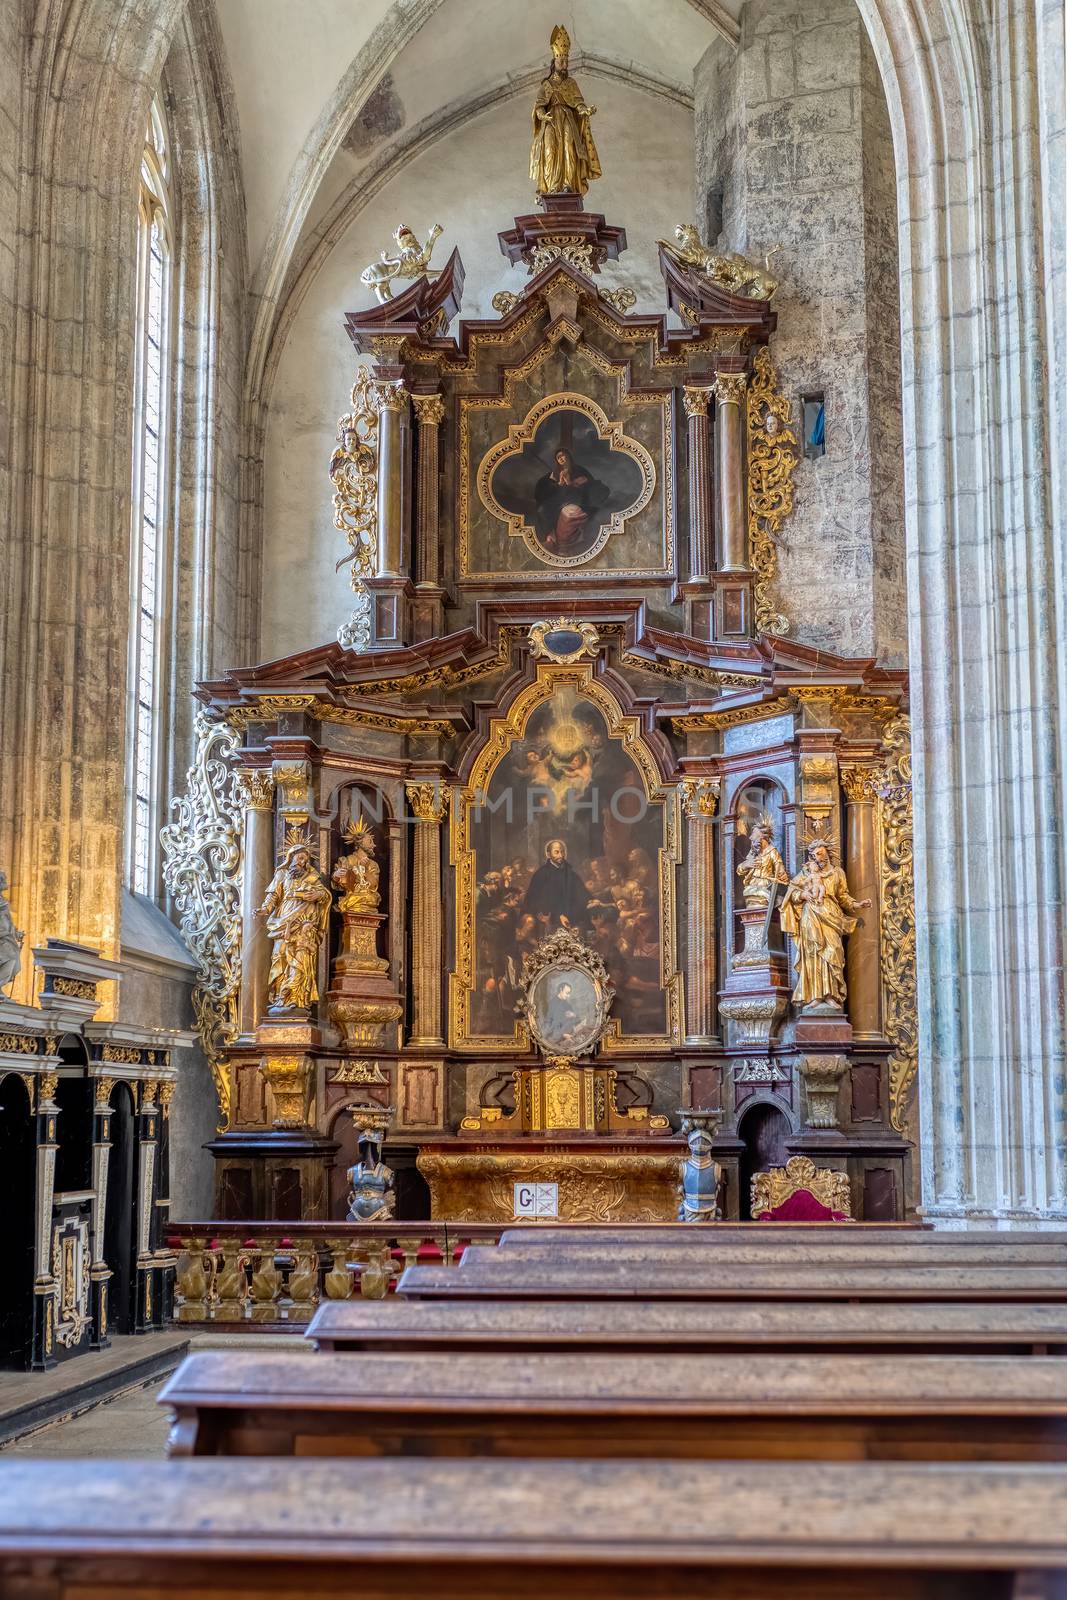 Altar amd interior of famous czech Cathedral of Assumption of Our Lady and Saint John the Baptist, former monastery in Kutna Hora. Czech Republic, Europe